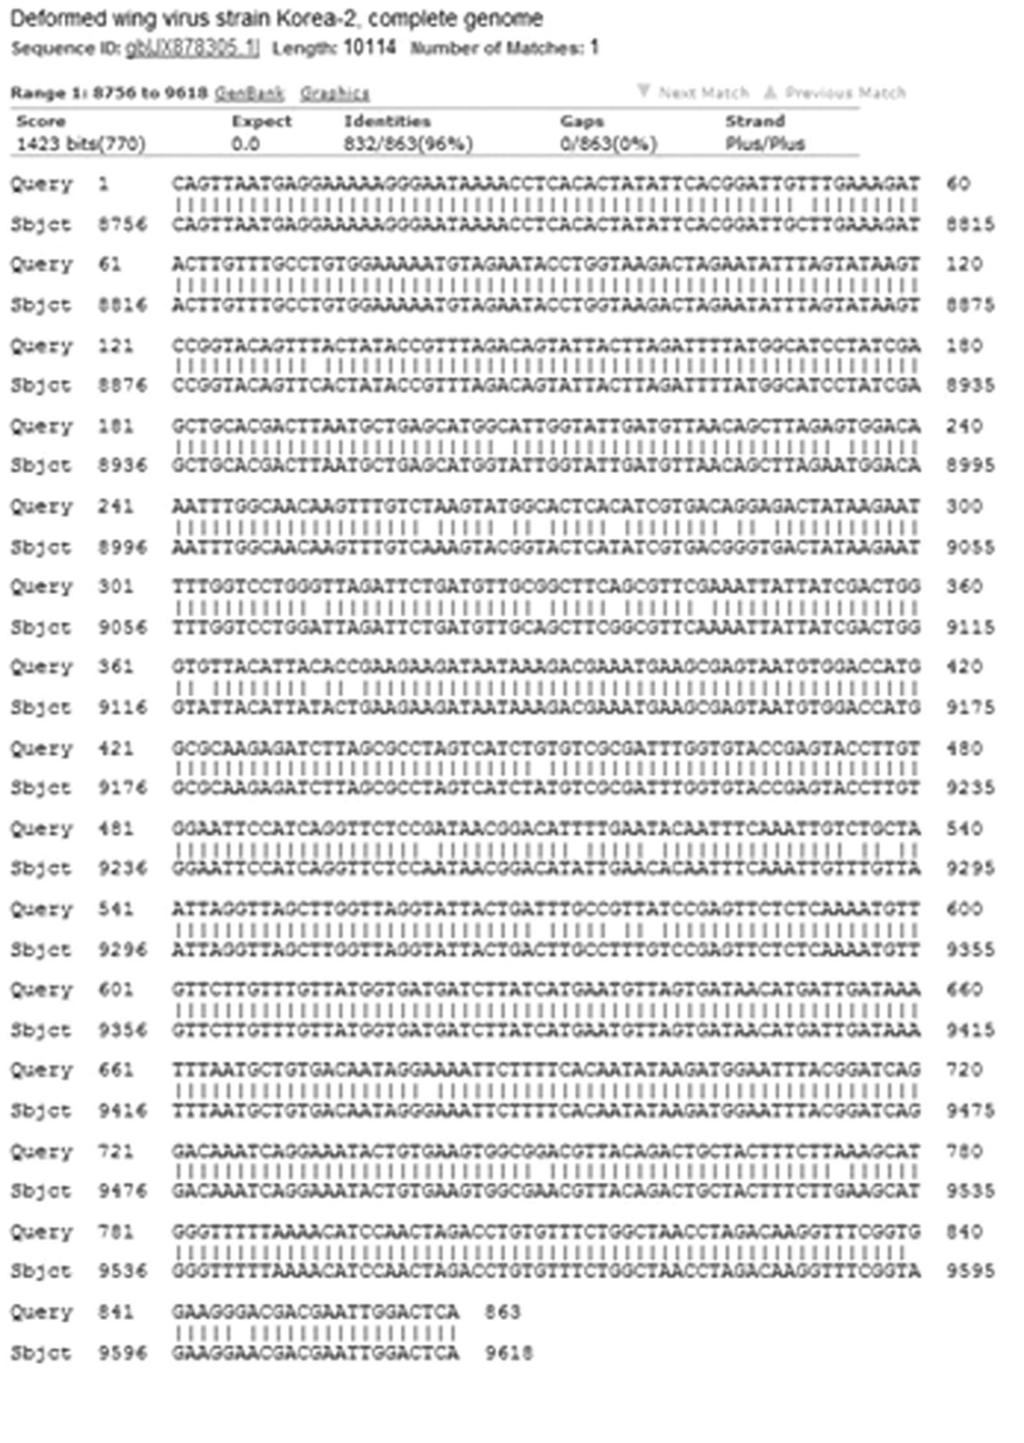 366 Fig. 5. DNA sequence homology between JX878305.1 and pbx DWV RdRP. JX878305.1 is complete nucleotides of DWV deposited in GenBank.